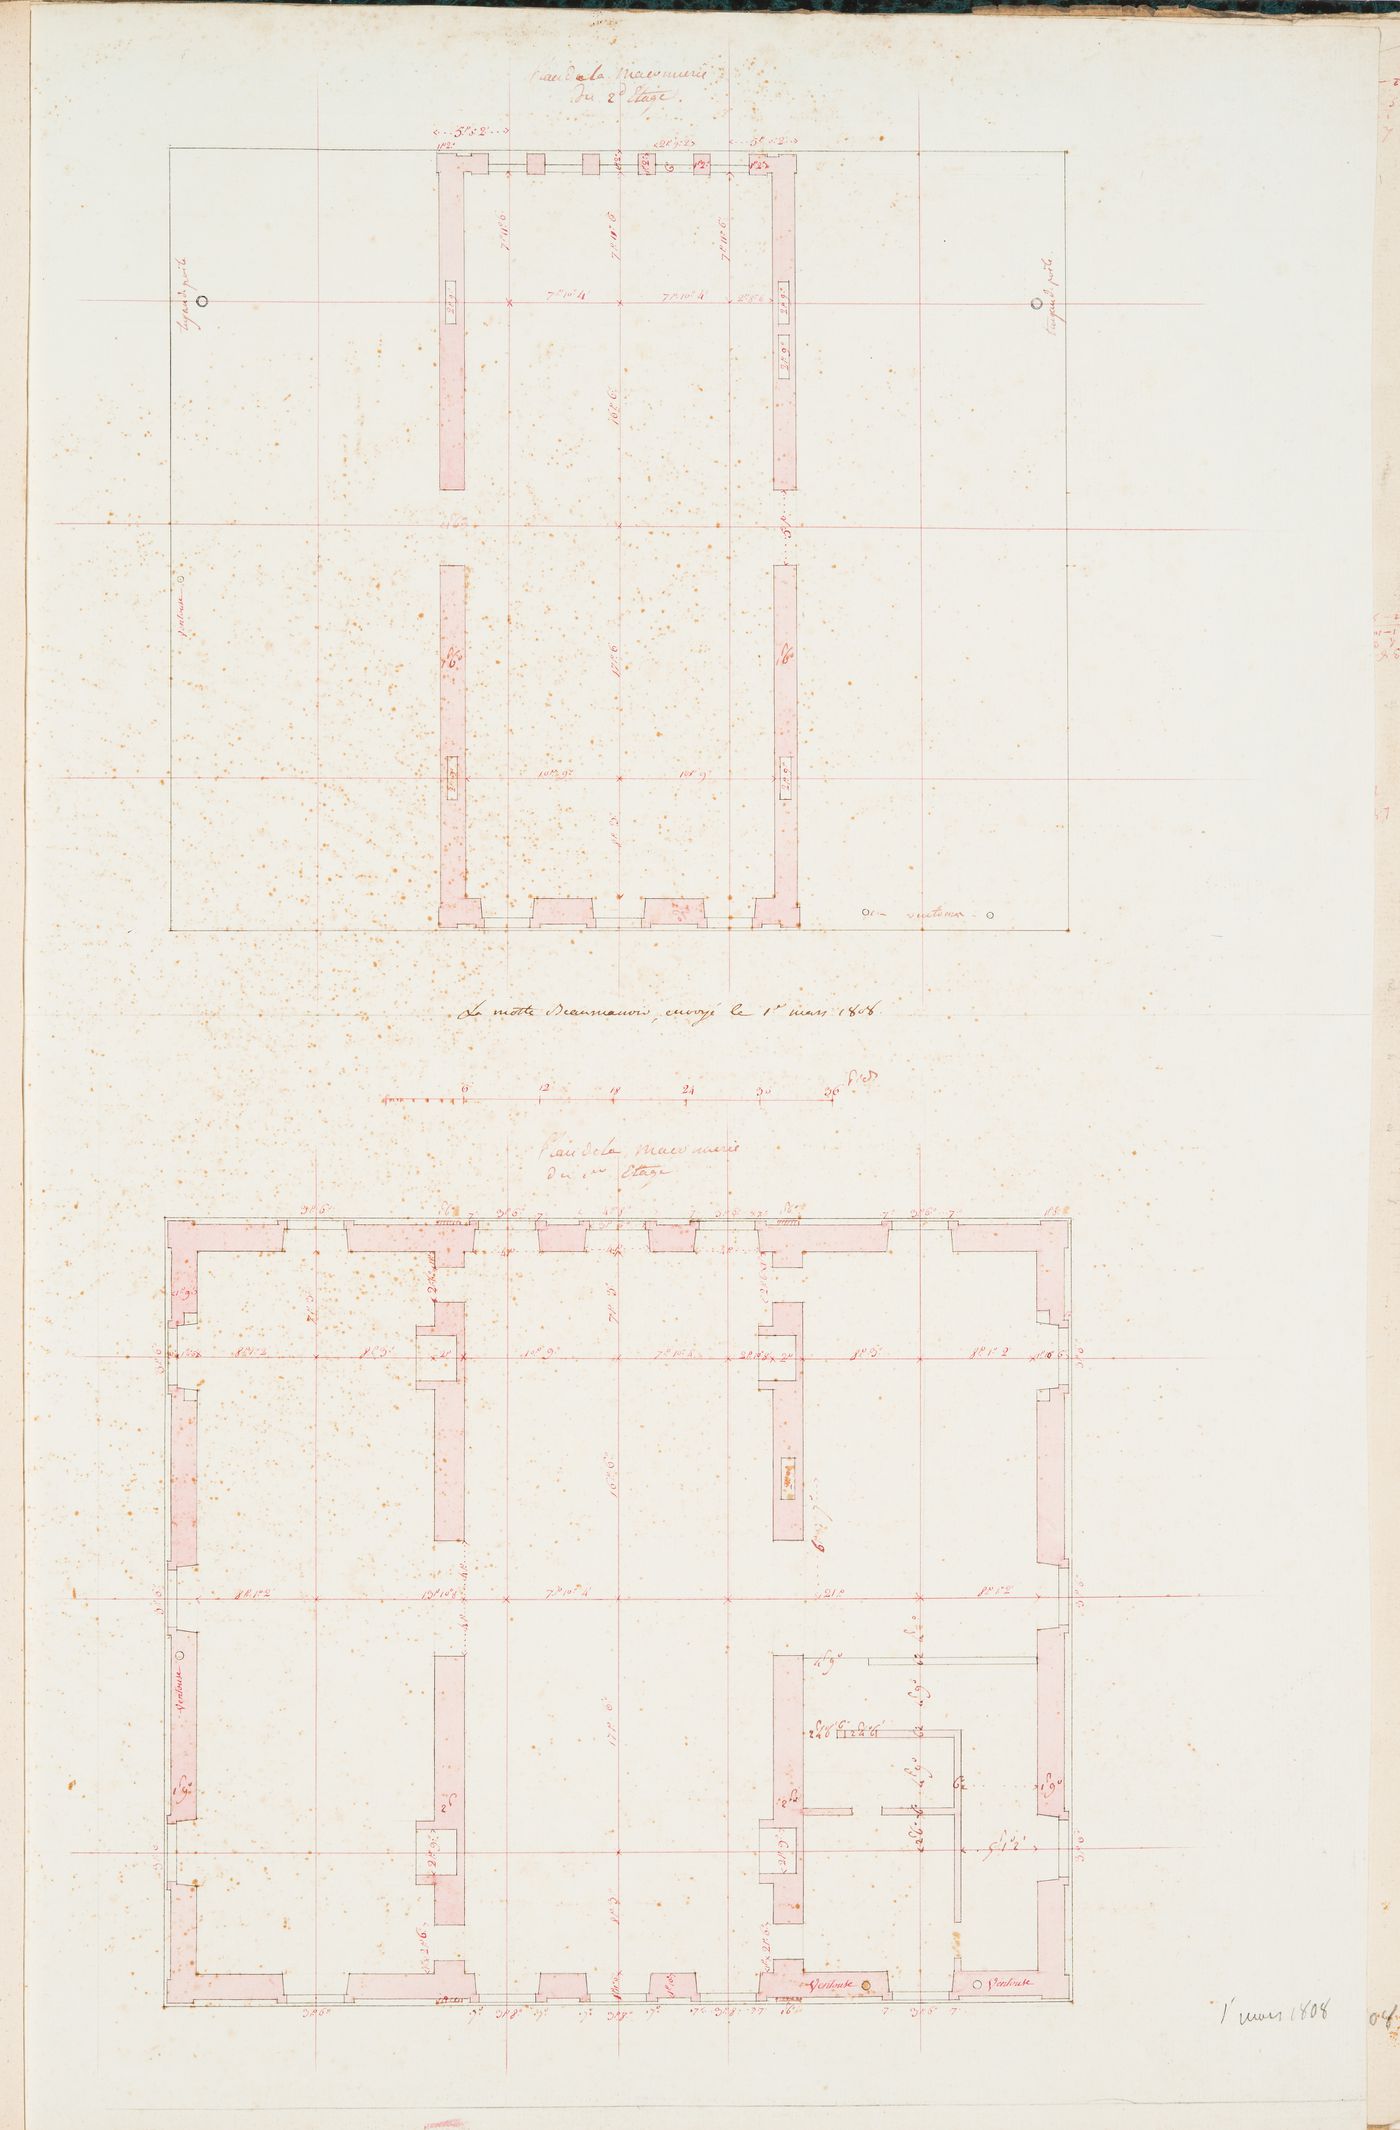 Project for a château for M. de Lorgeril, Motte Beaumanoir: First and second floor plans showing the stonework